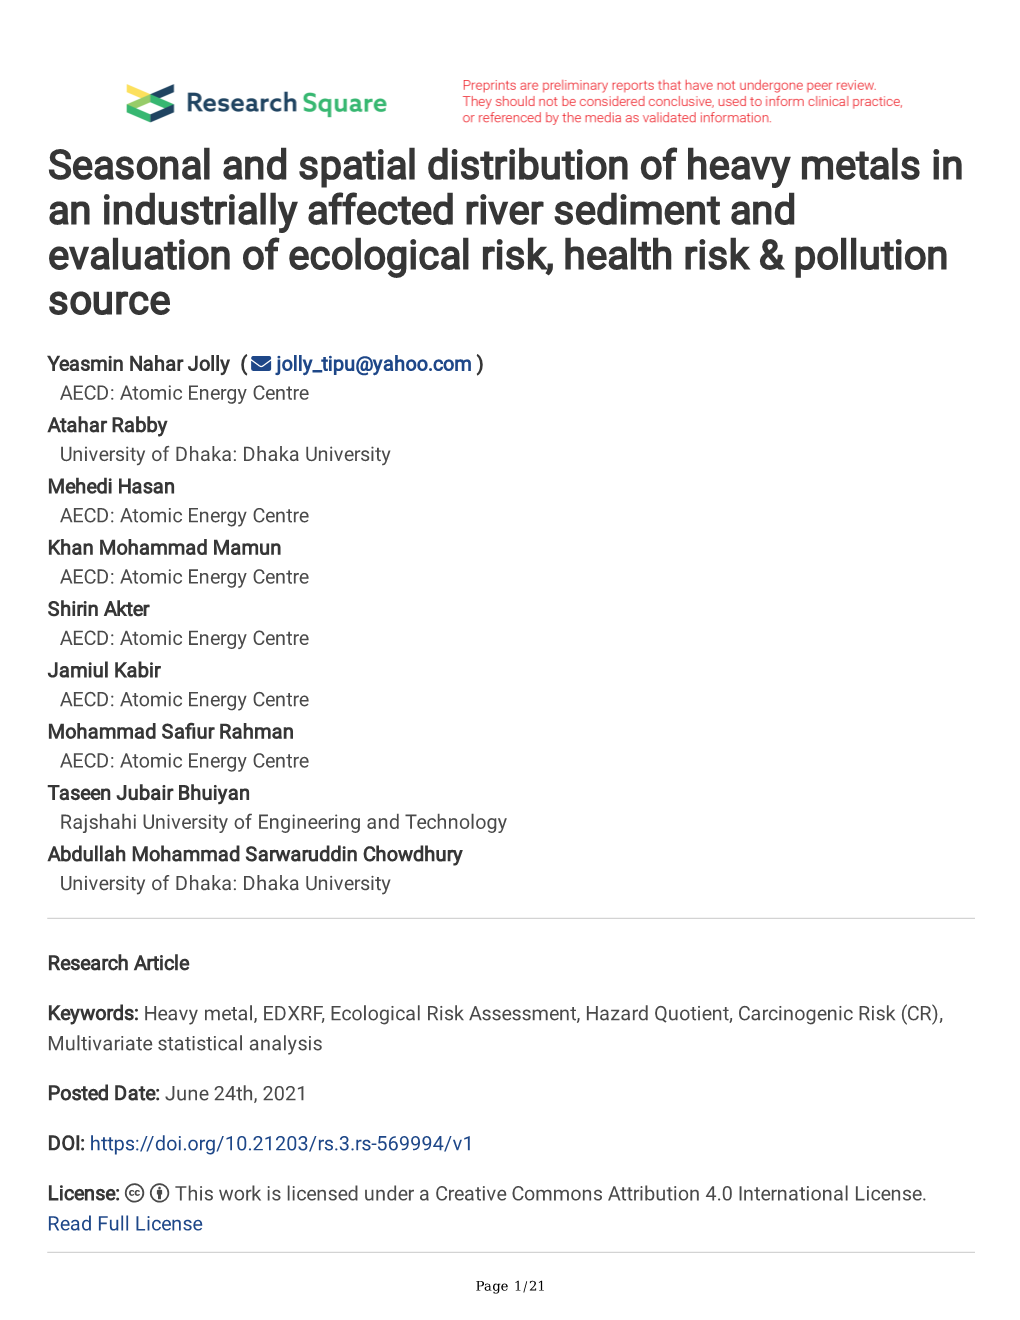 Seasonal and Spatial Distribution of Heavy Metals in an Industrially Affected River Sediment and Evaluation of Ecological Risk, Health Risk & Pollution Source